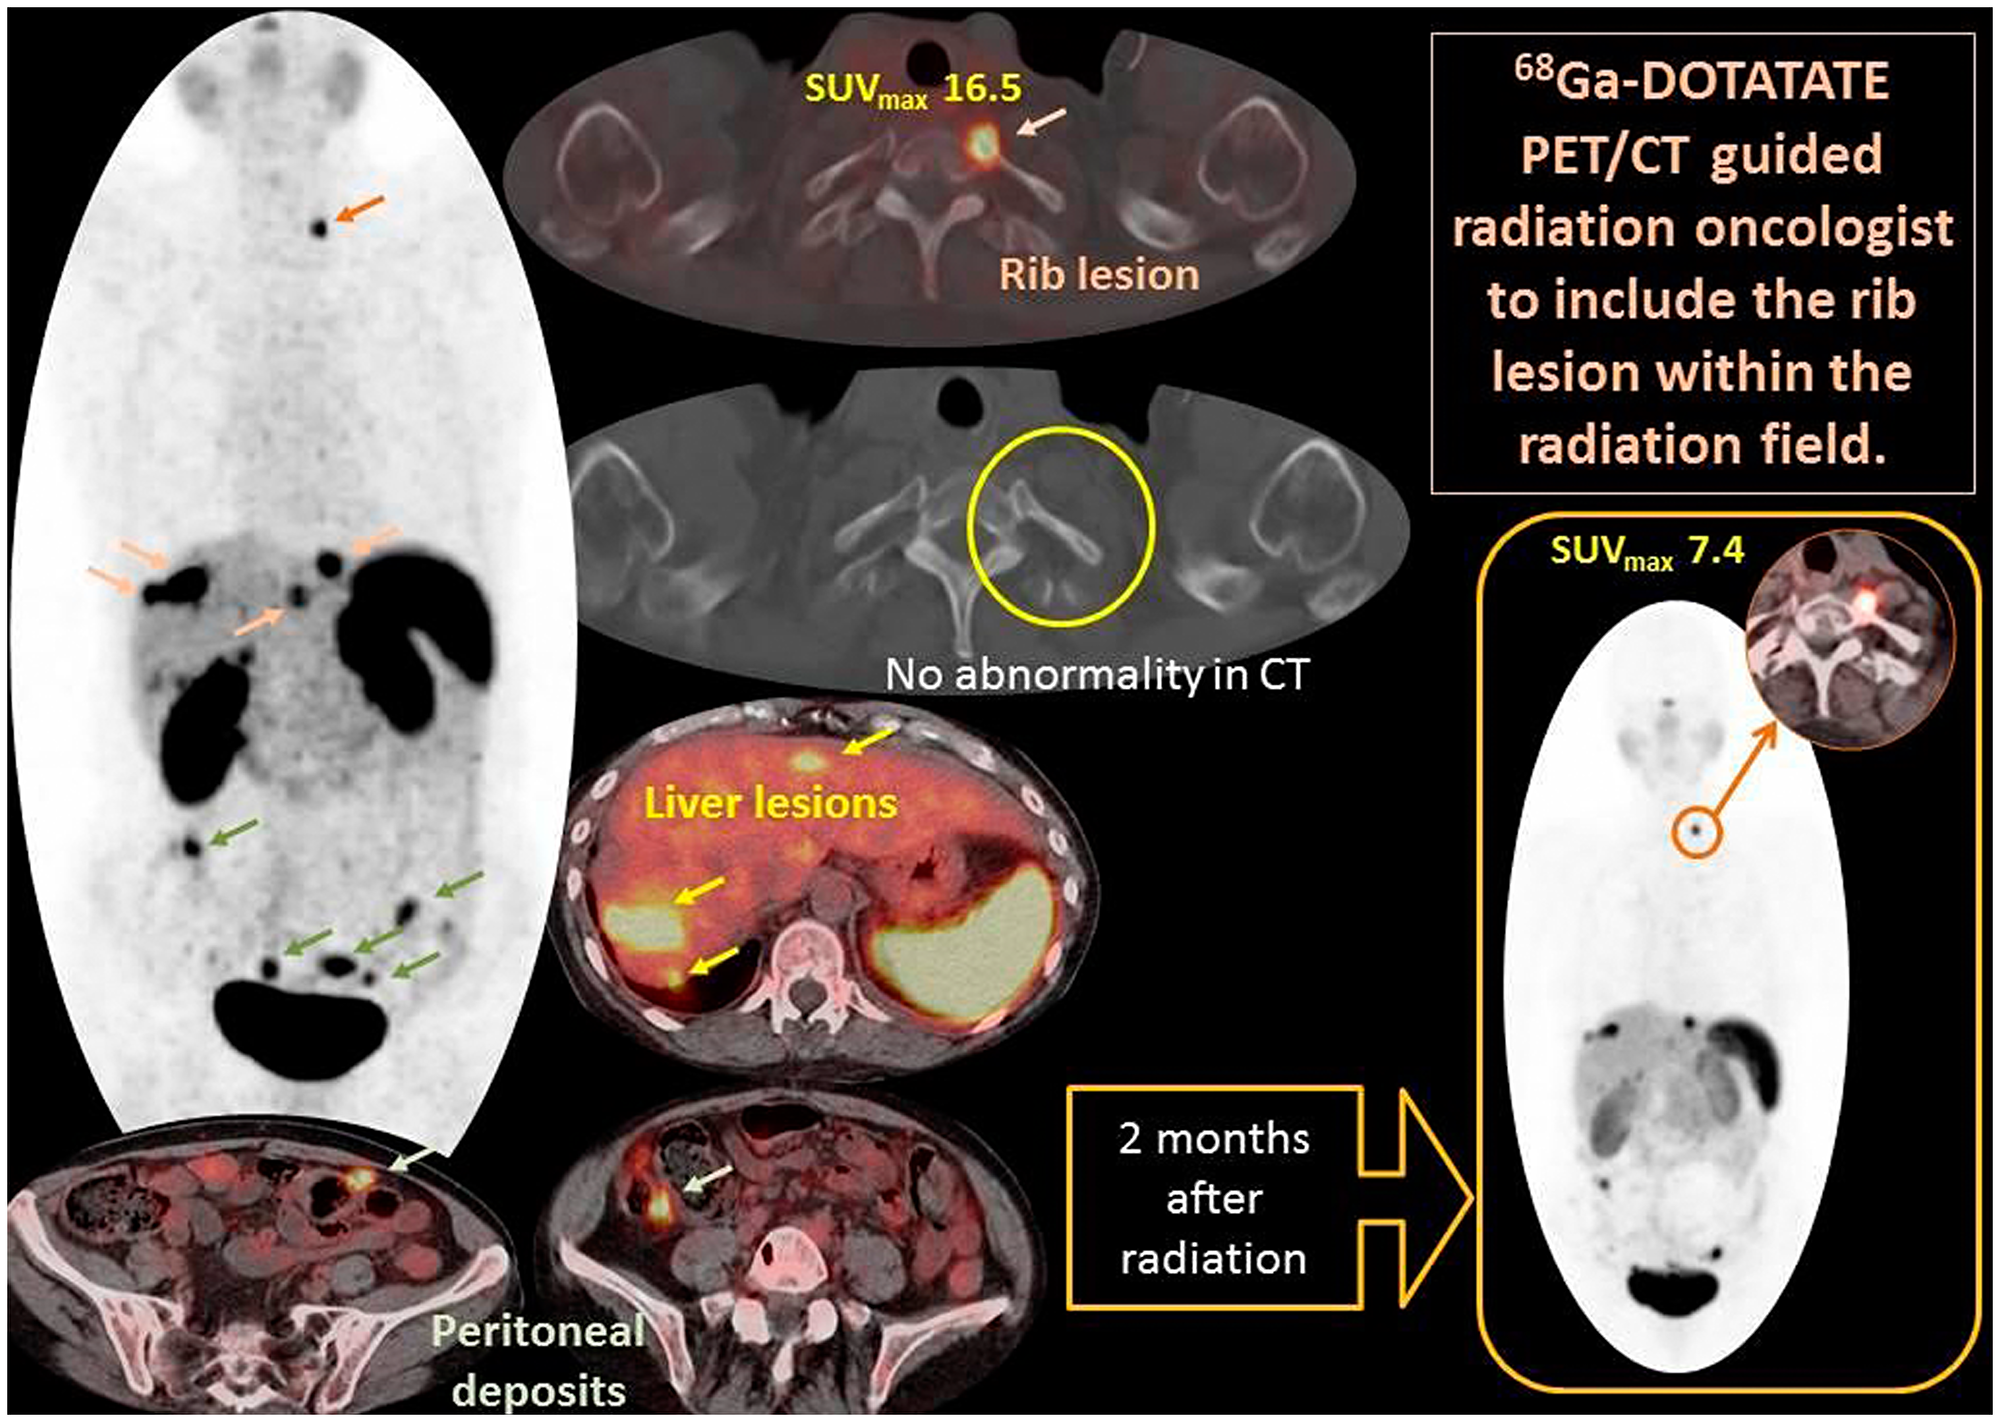 Demonstrates PET MIP image (Central) and fused PET/CT axial images of a case example of gallium- 68 DOTATATE that influenced and guided management.